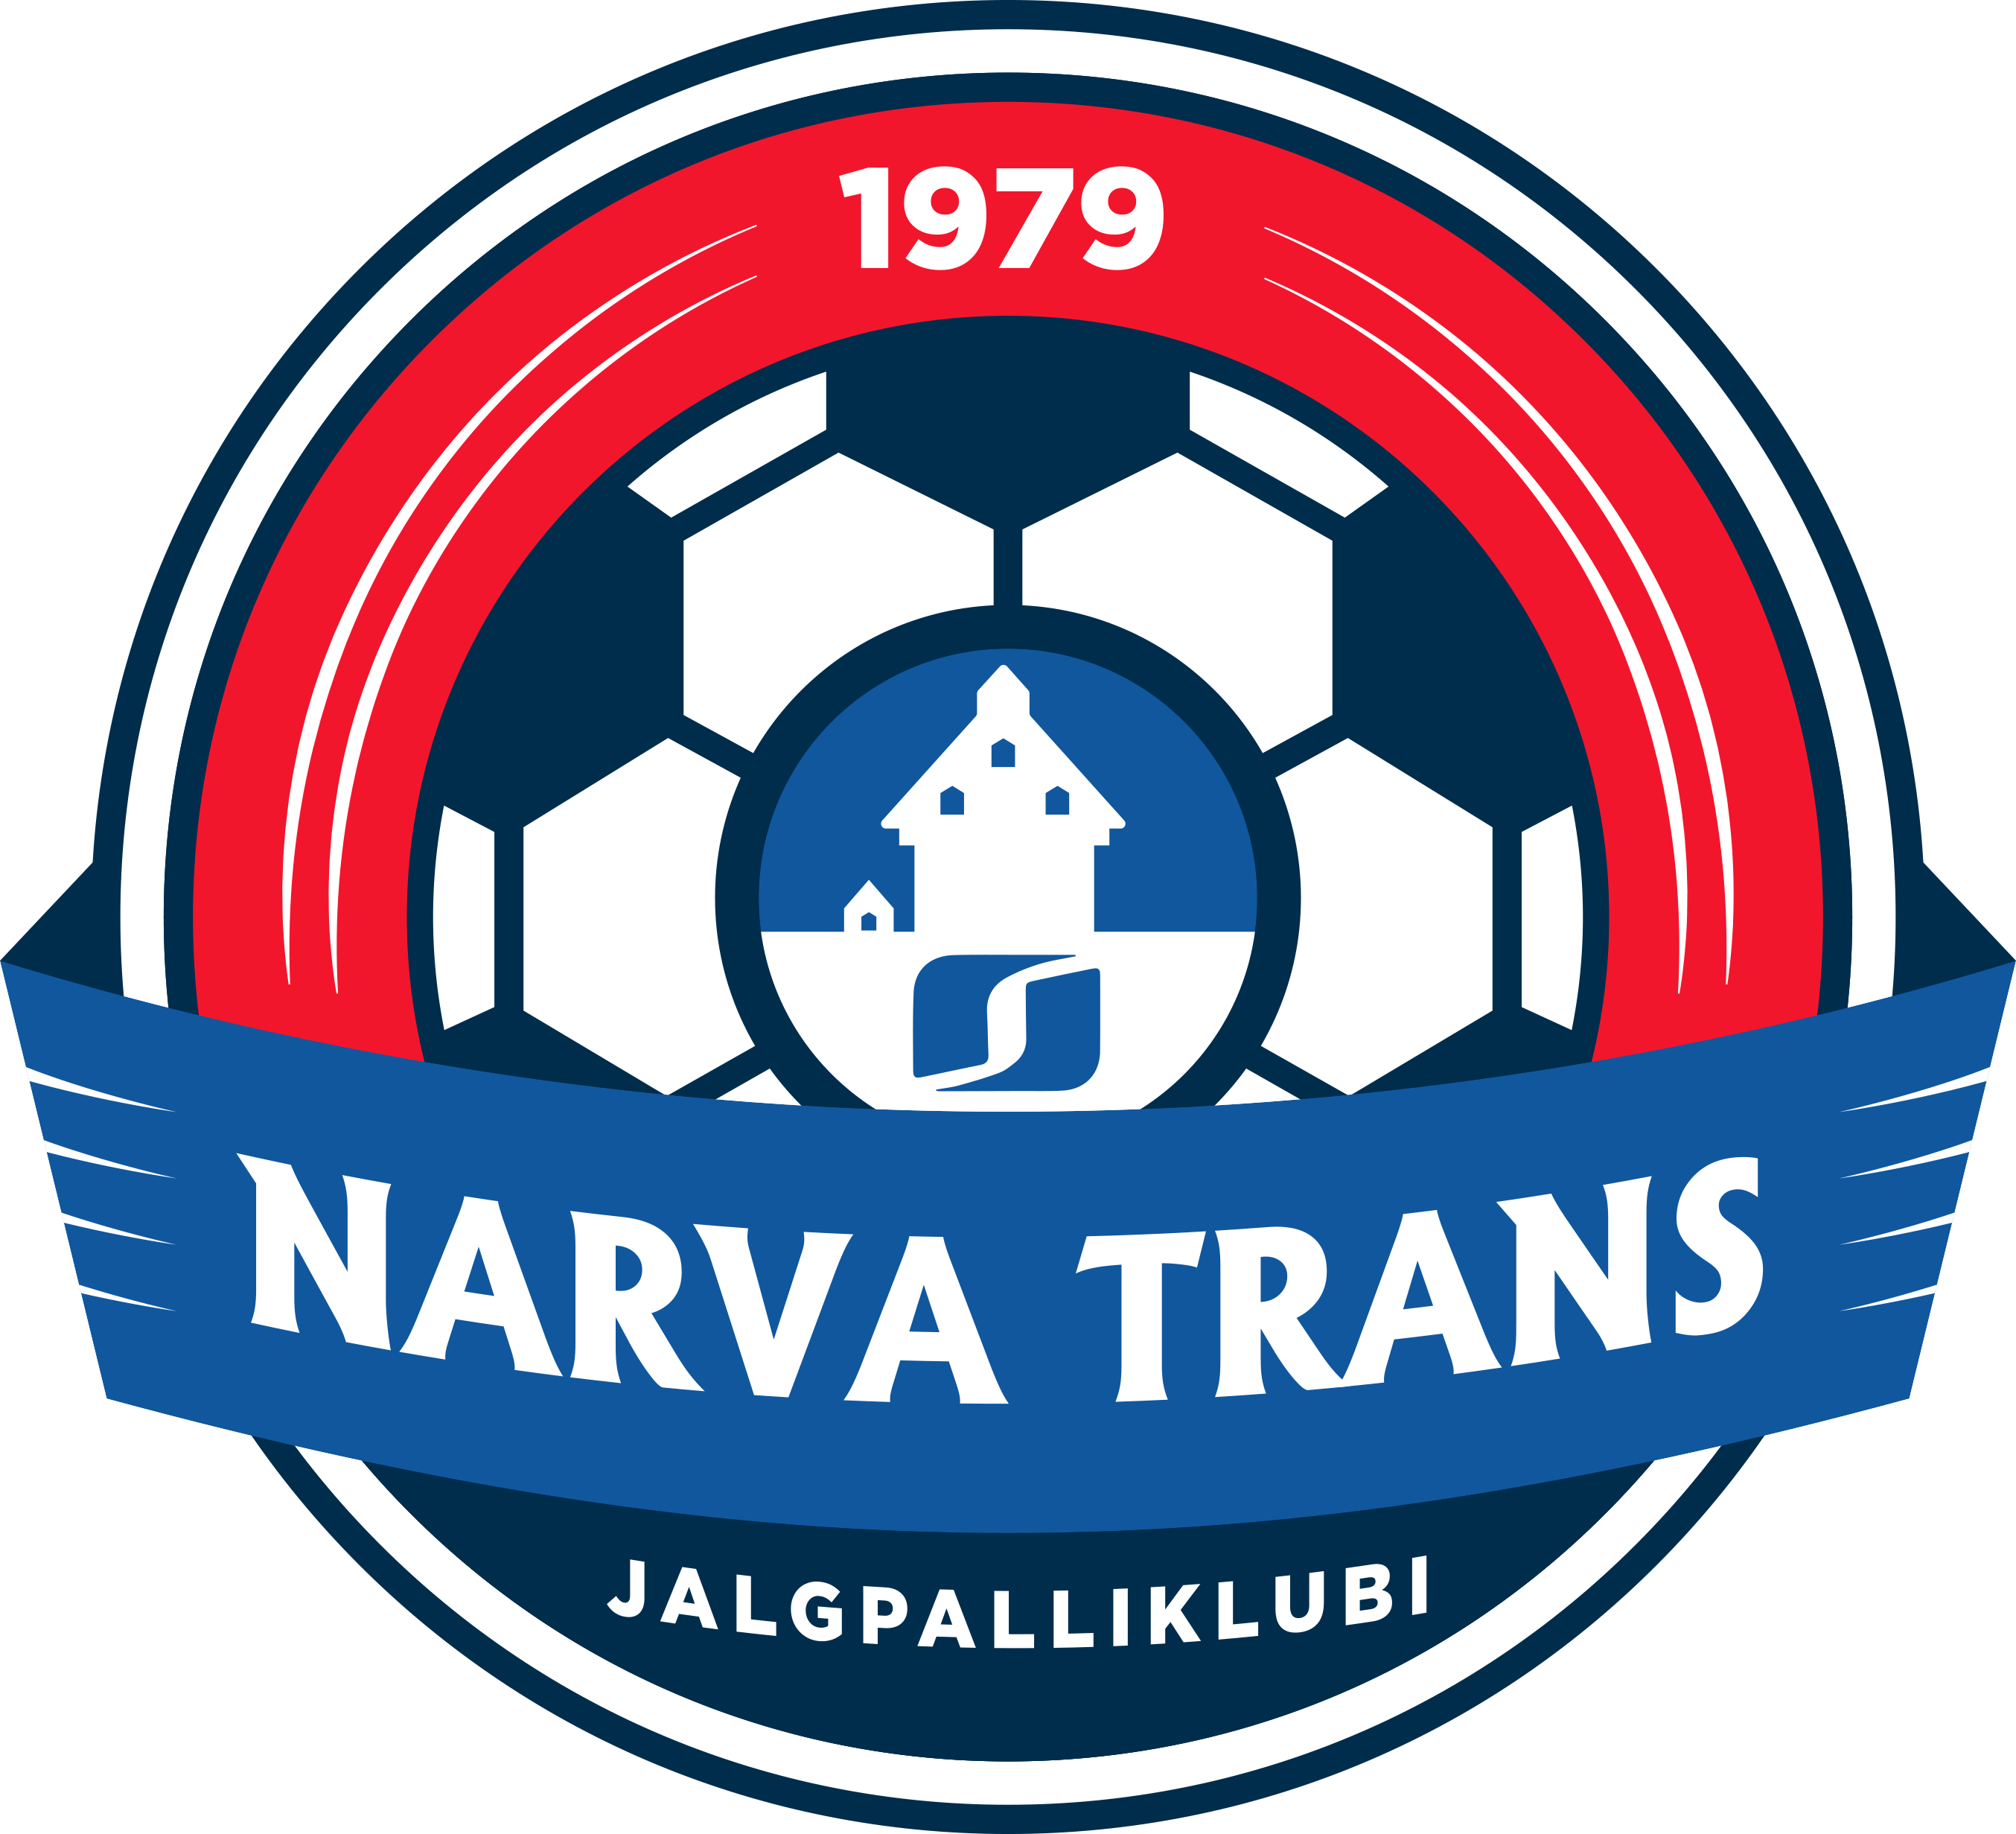 You are currently viewing JK Narva Trans